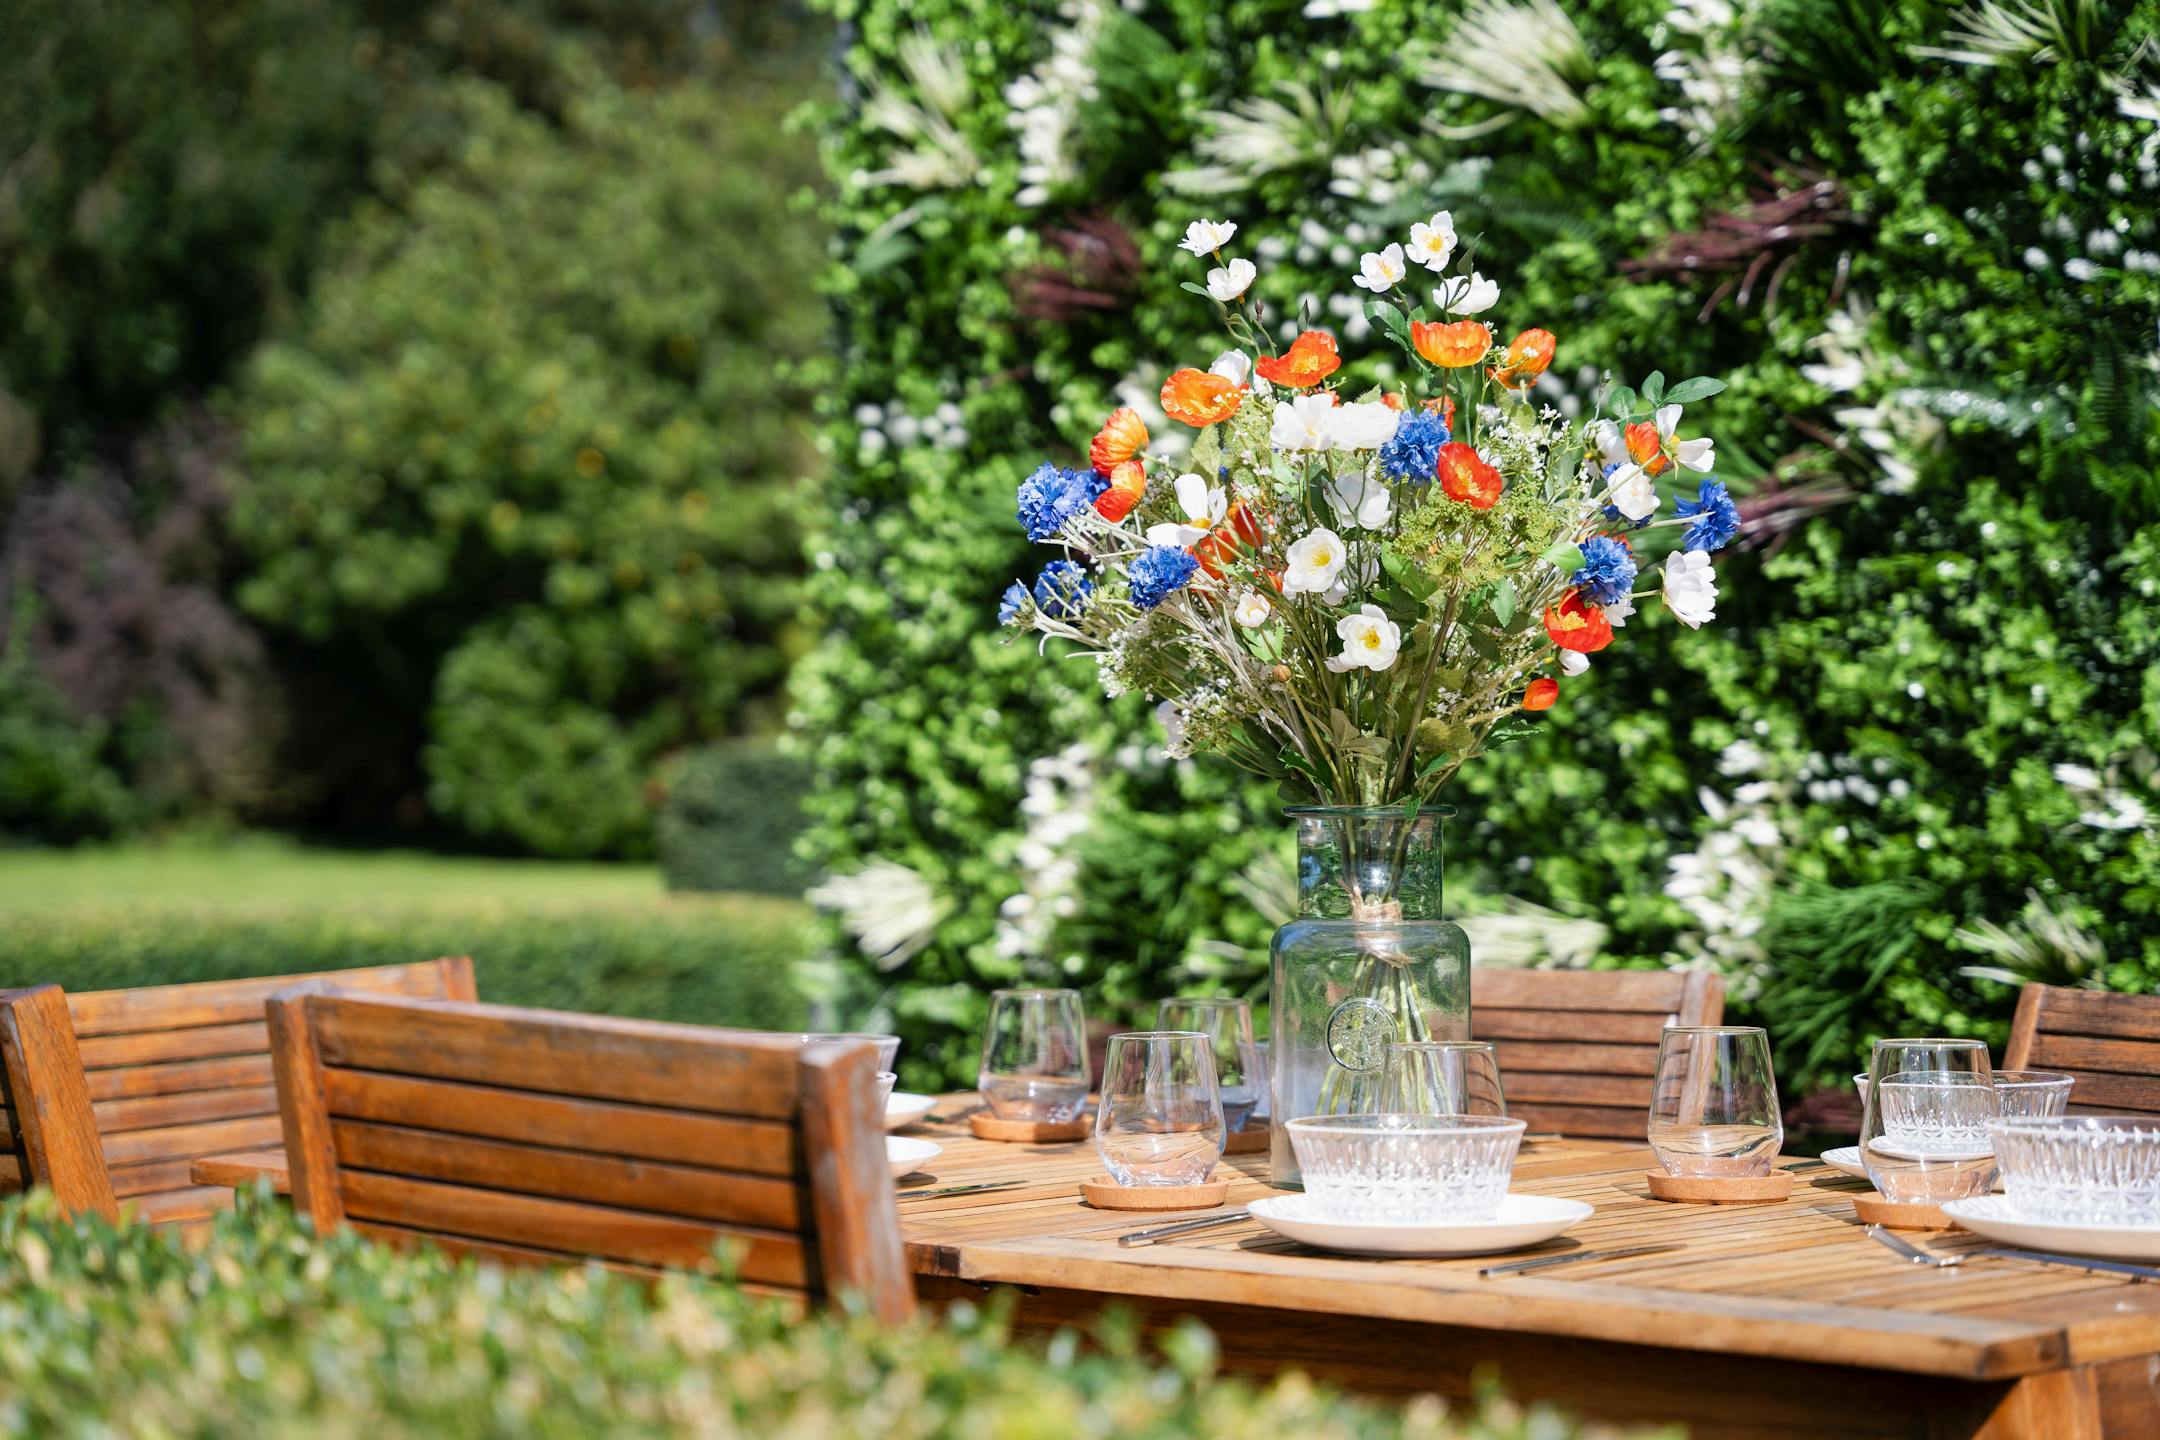 Artificial meadow bouquet on outdoor dining table with green living wall